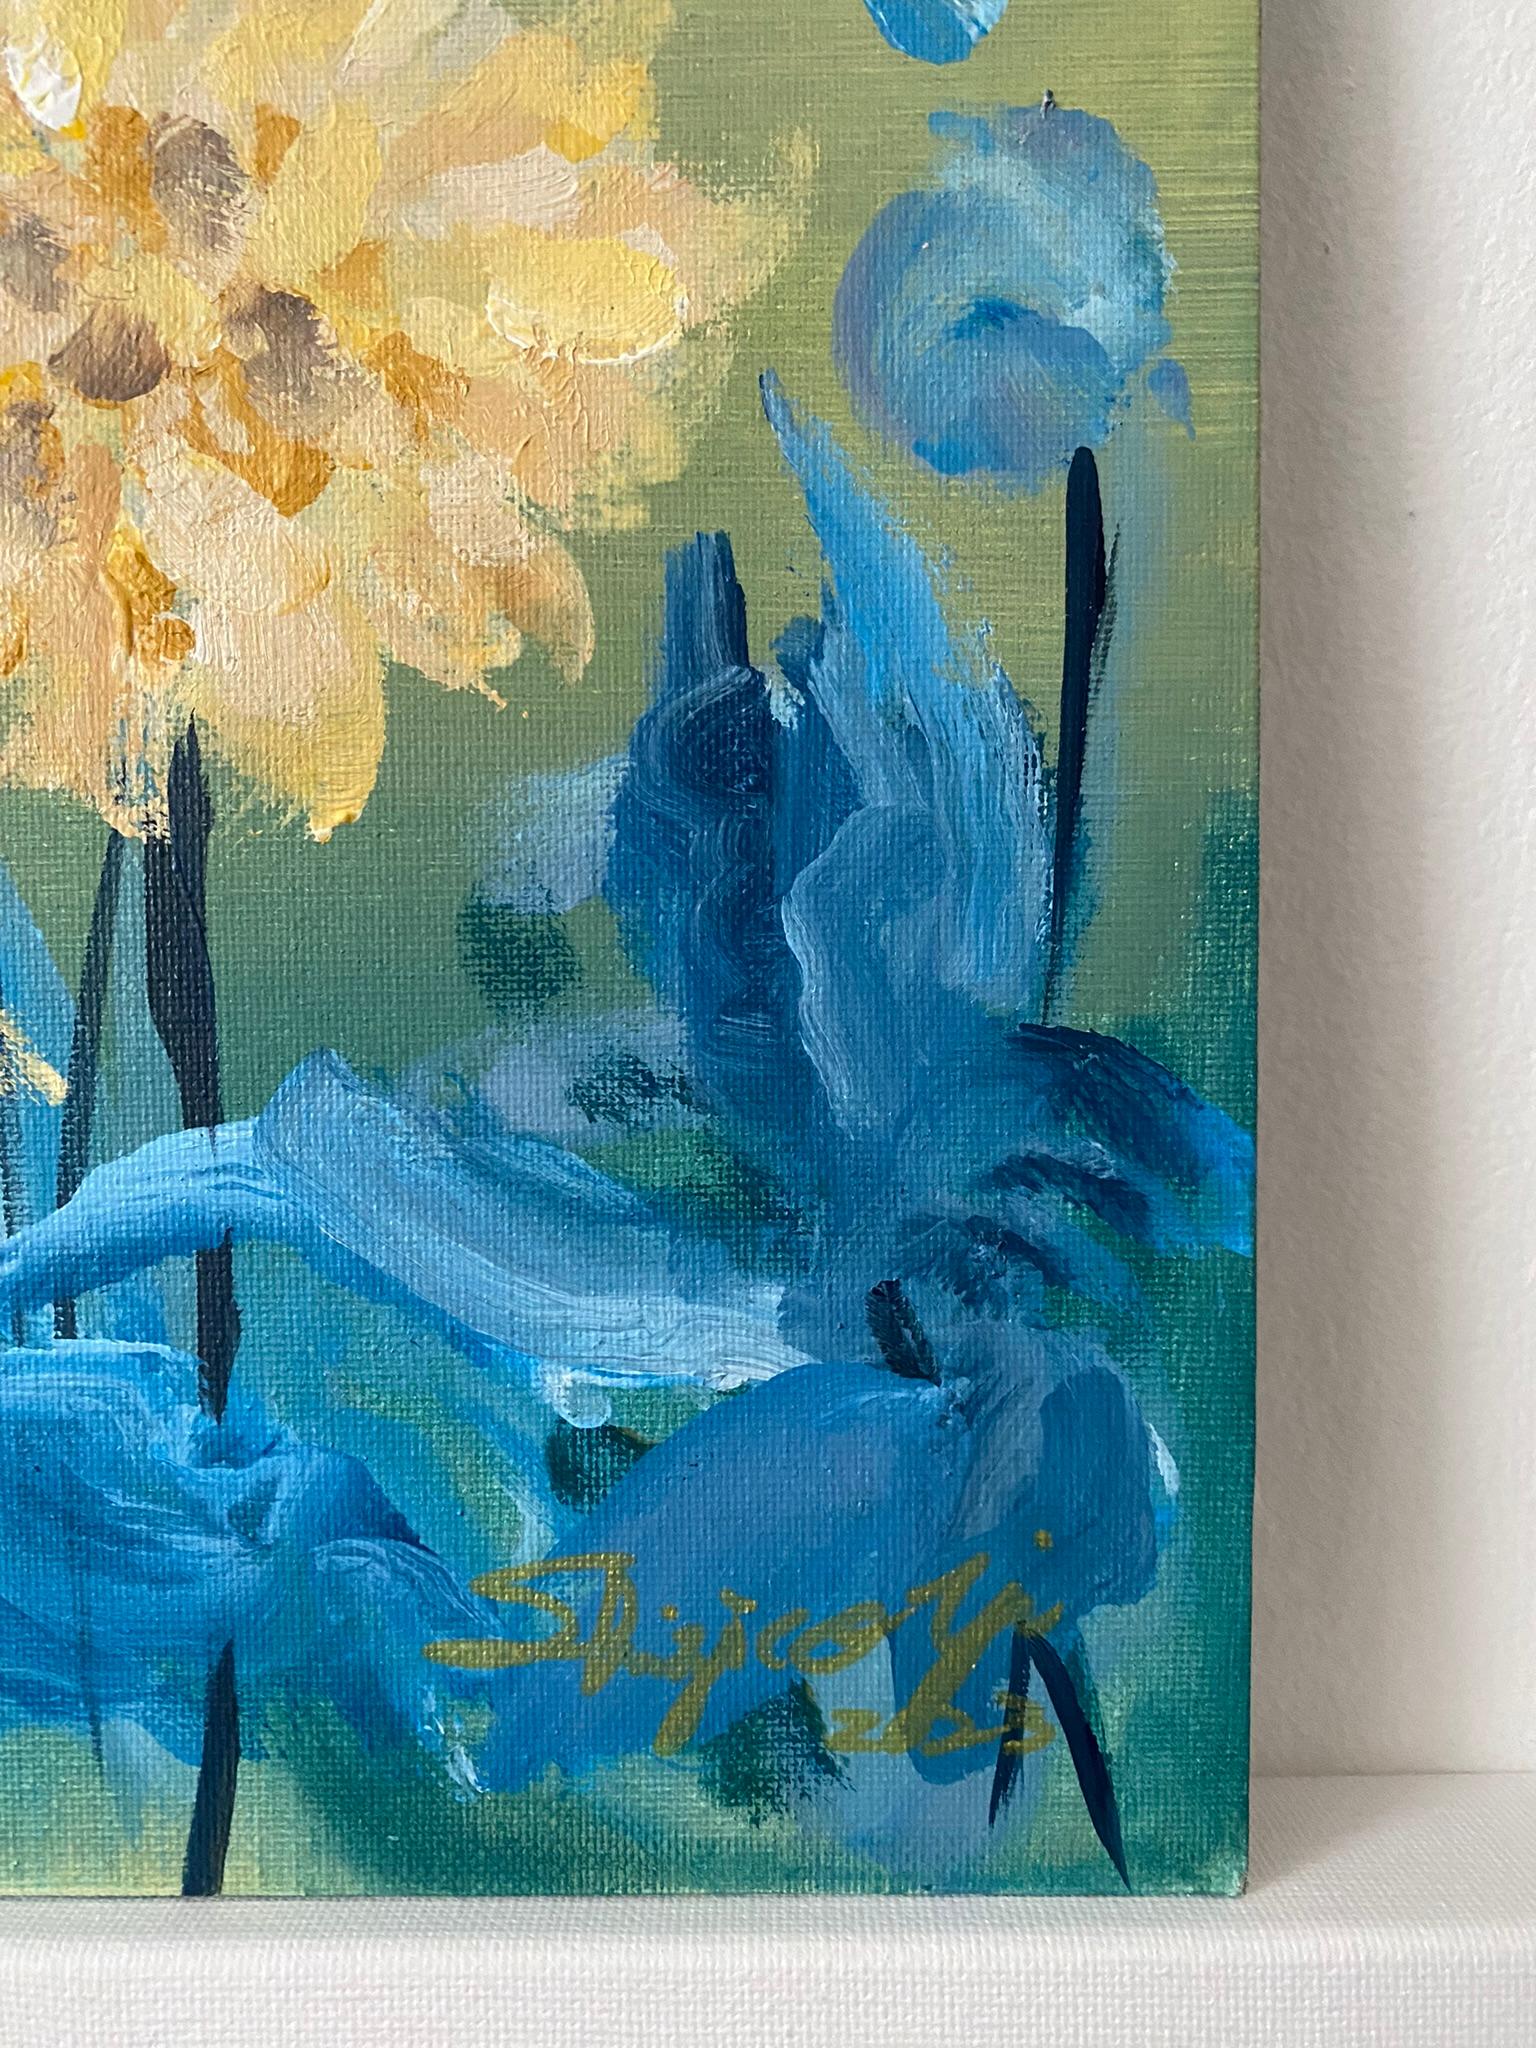 Original-Yellow Dahlias in Blue-Abstract-Expression-British school- UK Artist For Sale 1